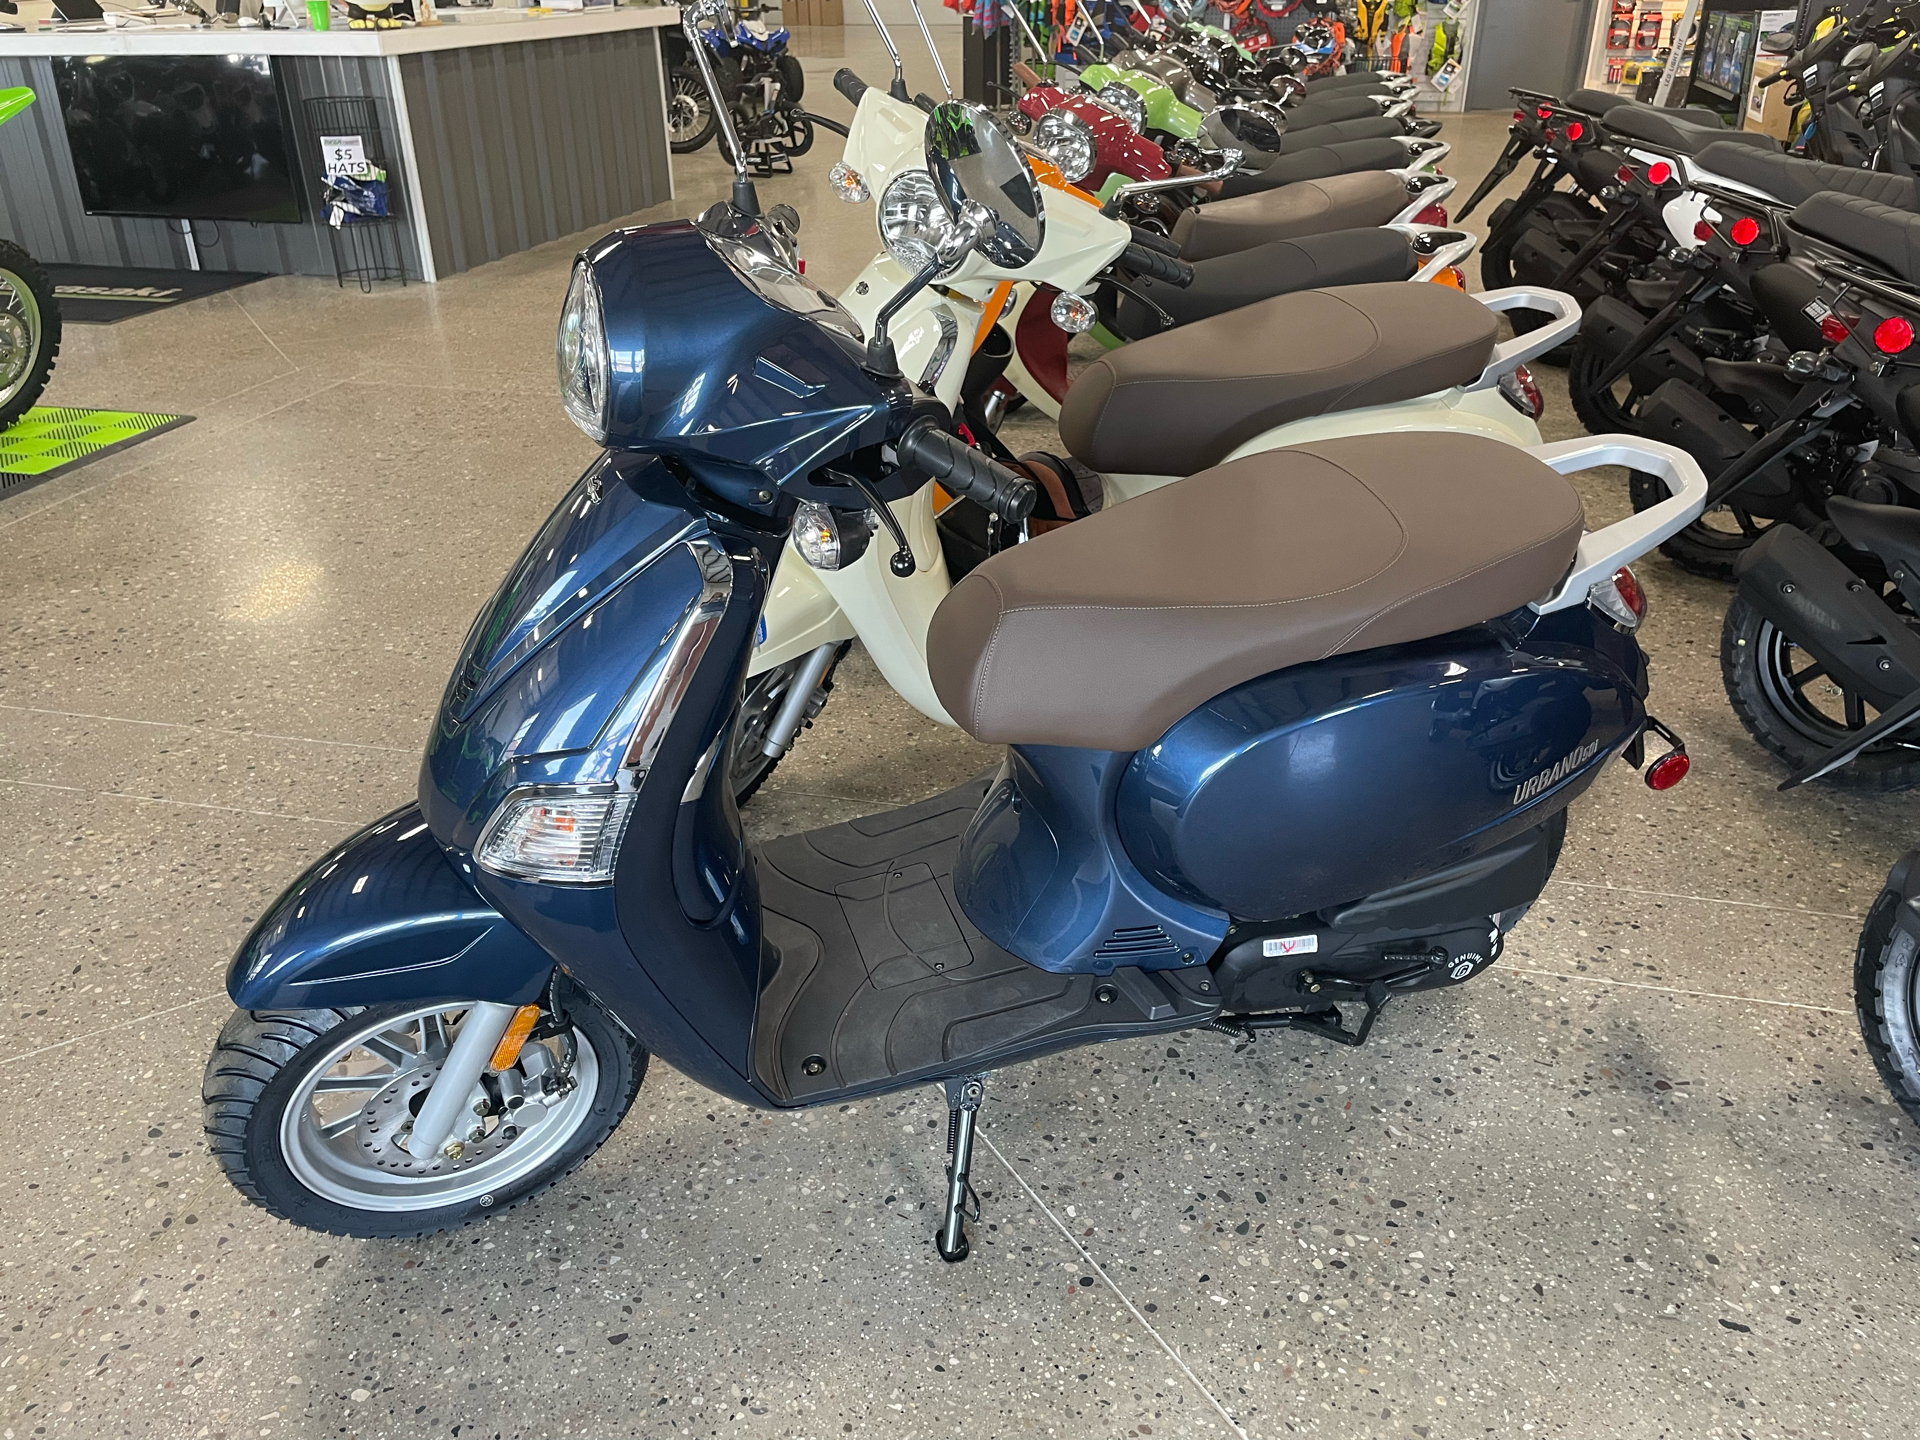 2022 Genuine Scooters Urbano 50i in Gaylord, Michigan - Photo 1